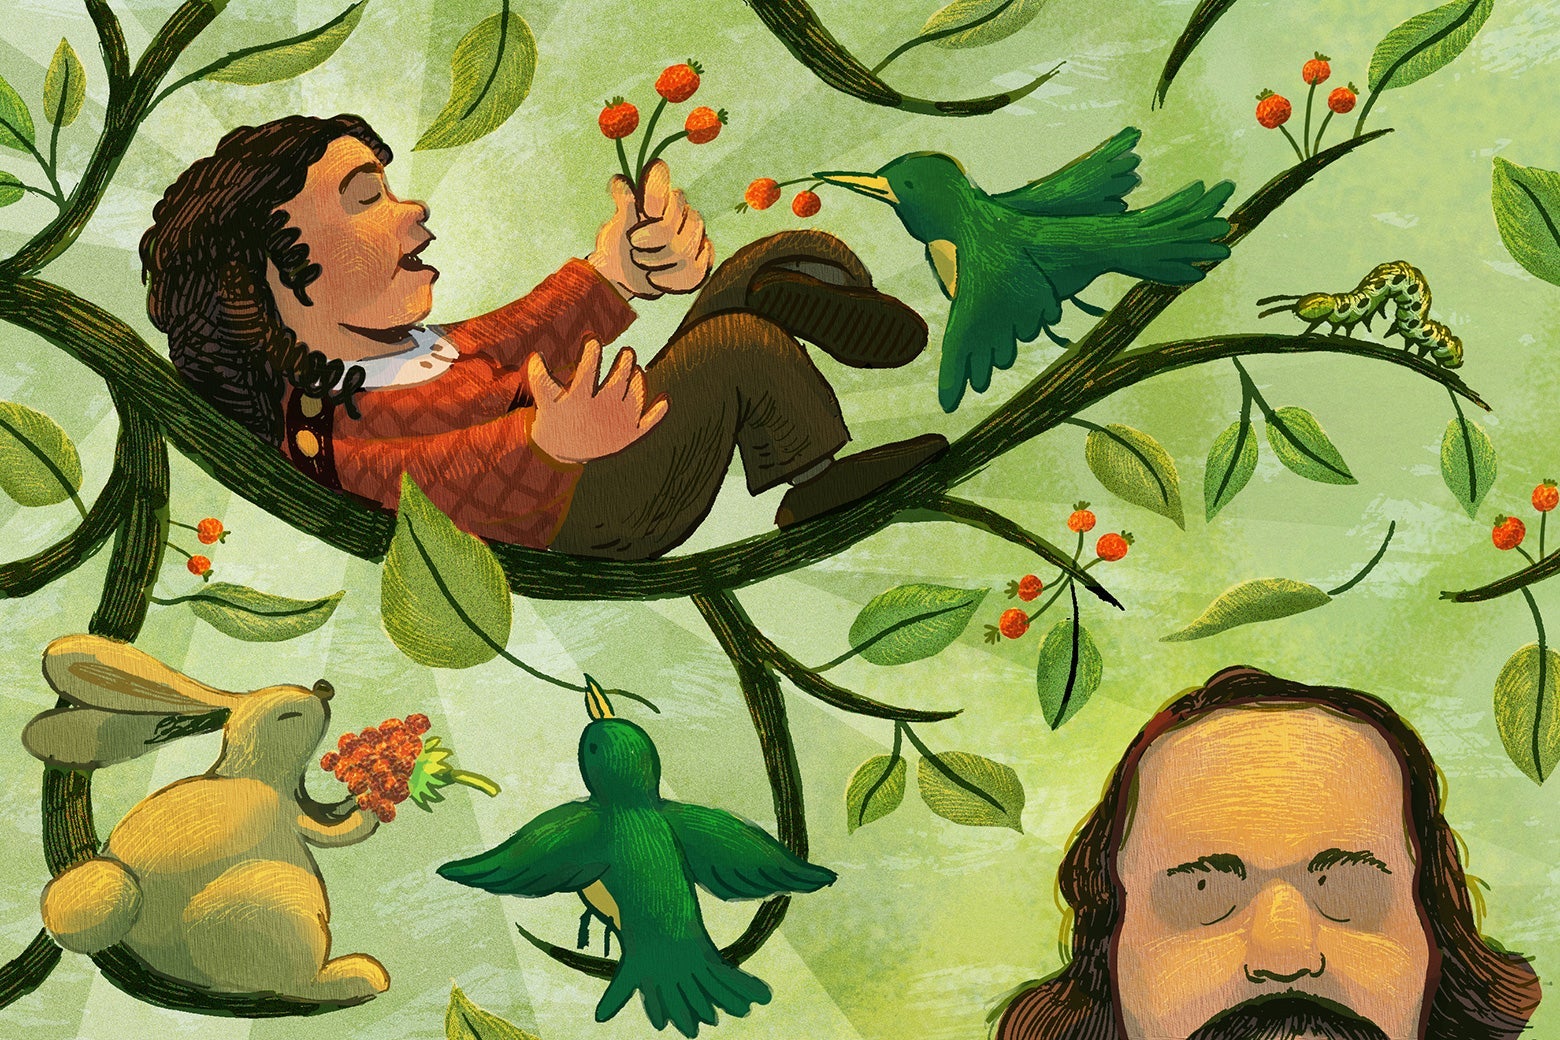 A colorful and vibrant illustration of Nathaniel Hawthorne and his young son.